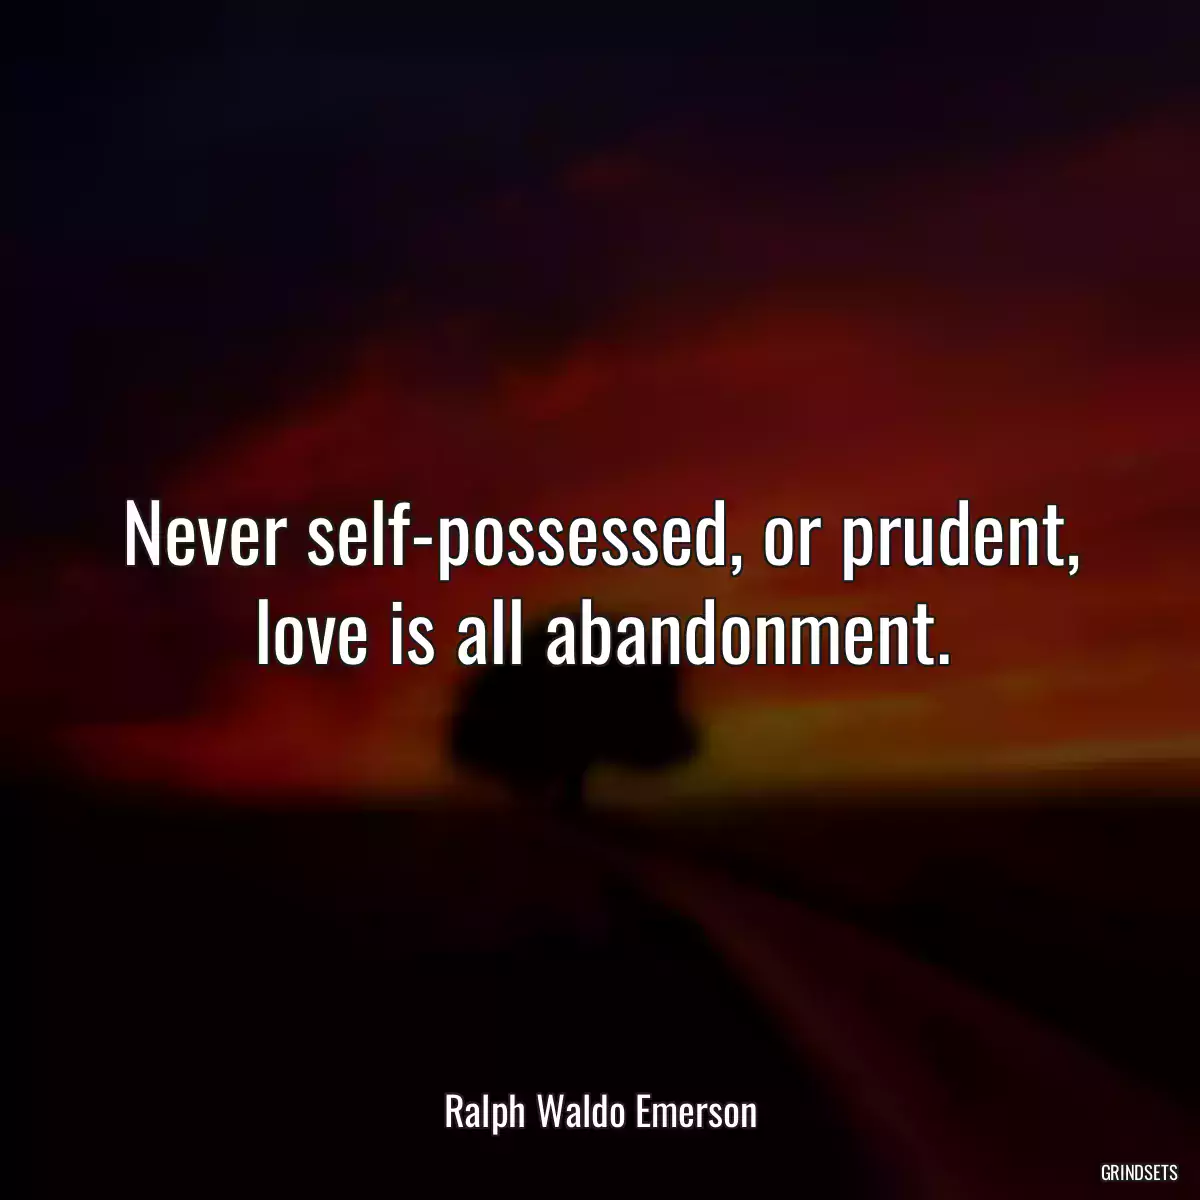 Never self-possessed, or prudent, love is all abandonment.